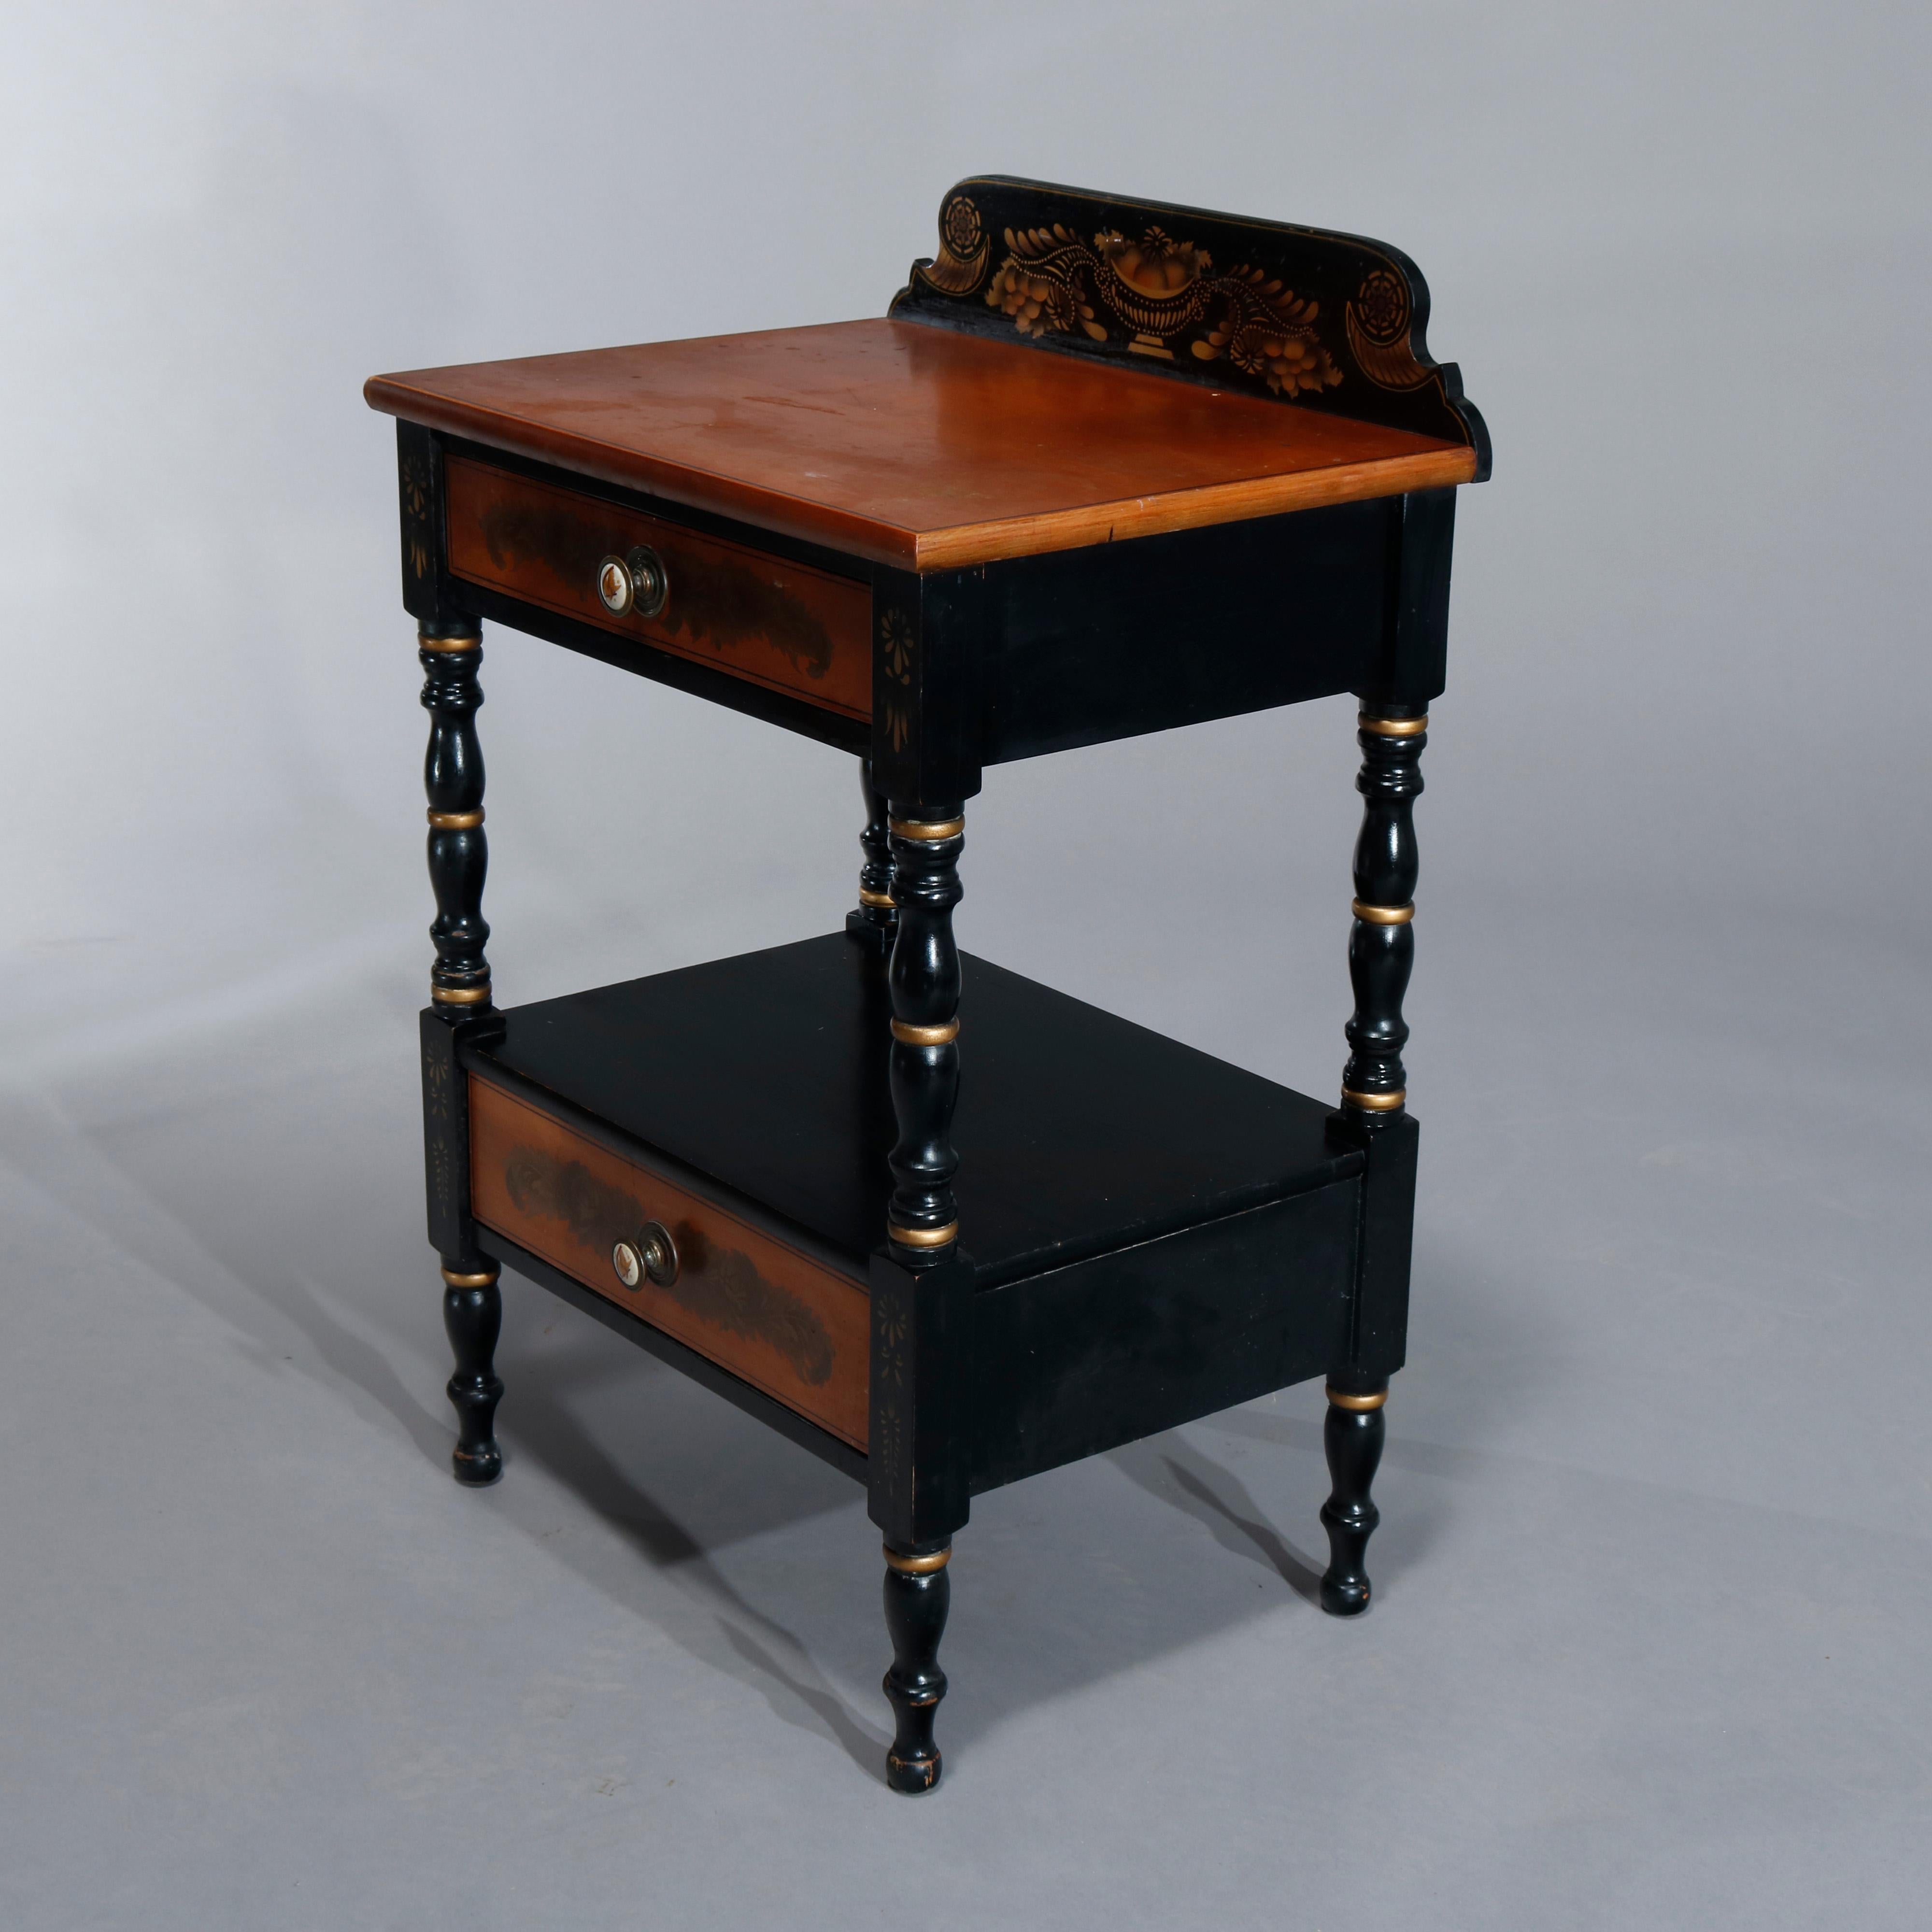 A vintage side stand by Hitchcock offers stenciled backsplash surmounting stand with ebonized frame and having two stenciled drawers, raised on turned legs, gilt banding throughout, en verso signed as photographed, circa 1950.
 
Measures: 31